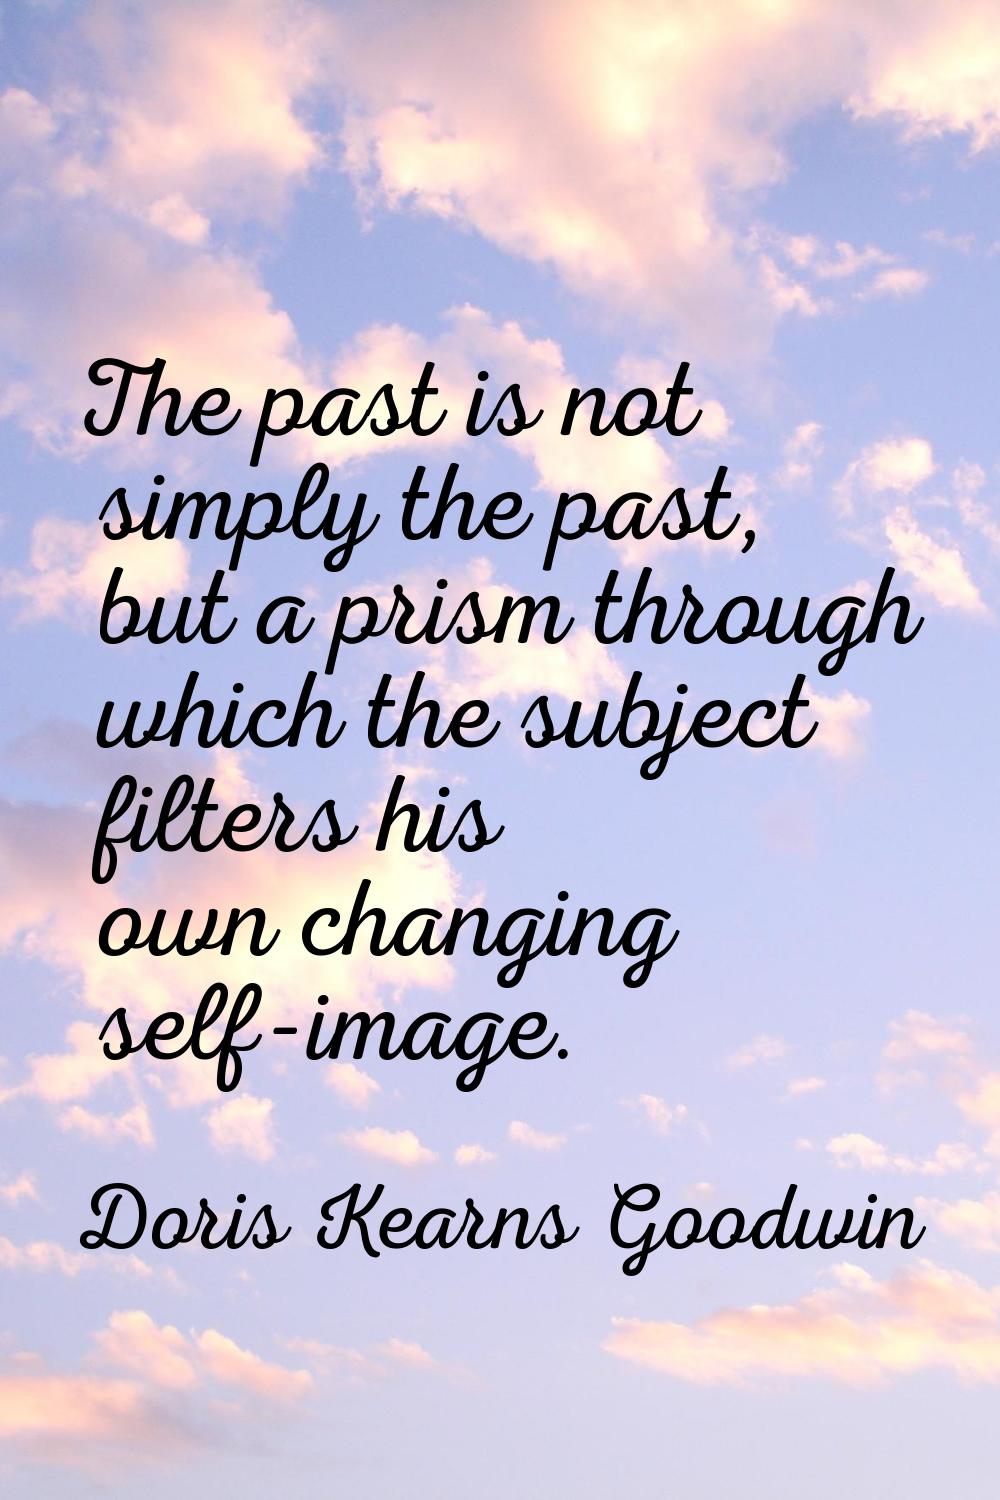 The past is not simply the past, but a prism through which the subject filters his own changing sel